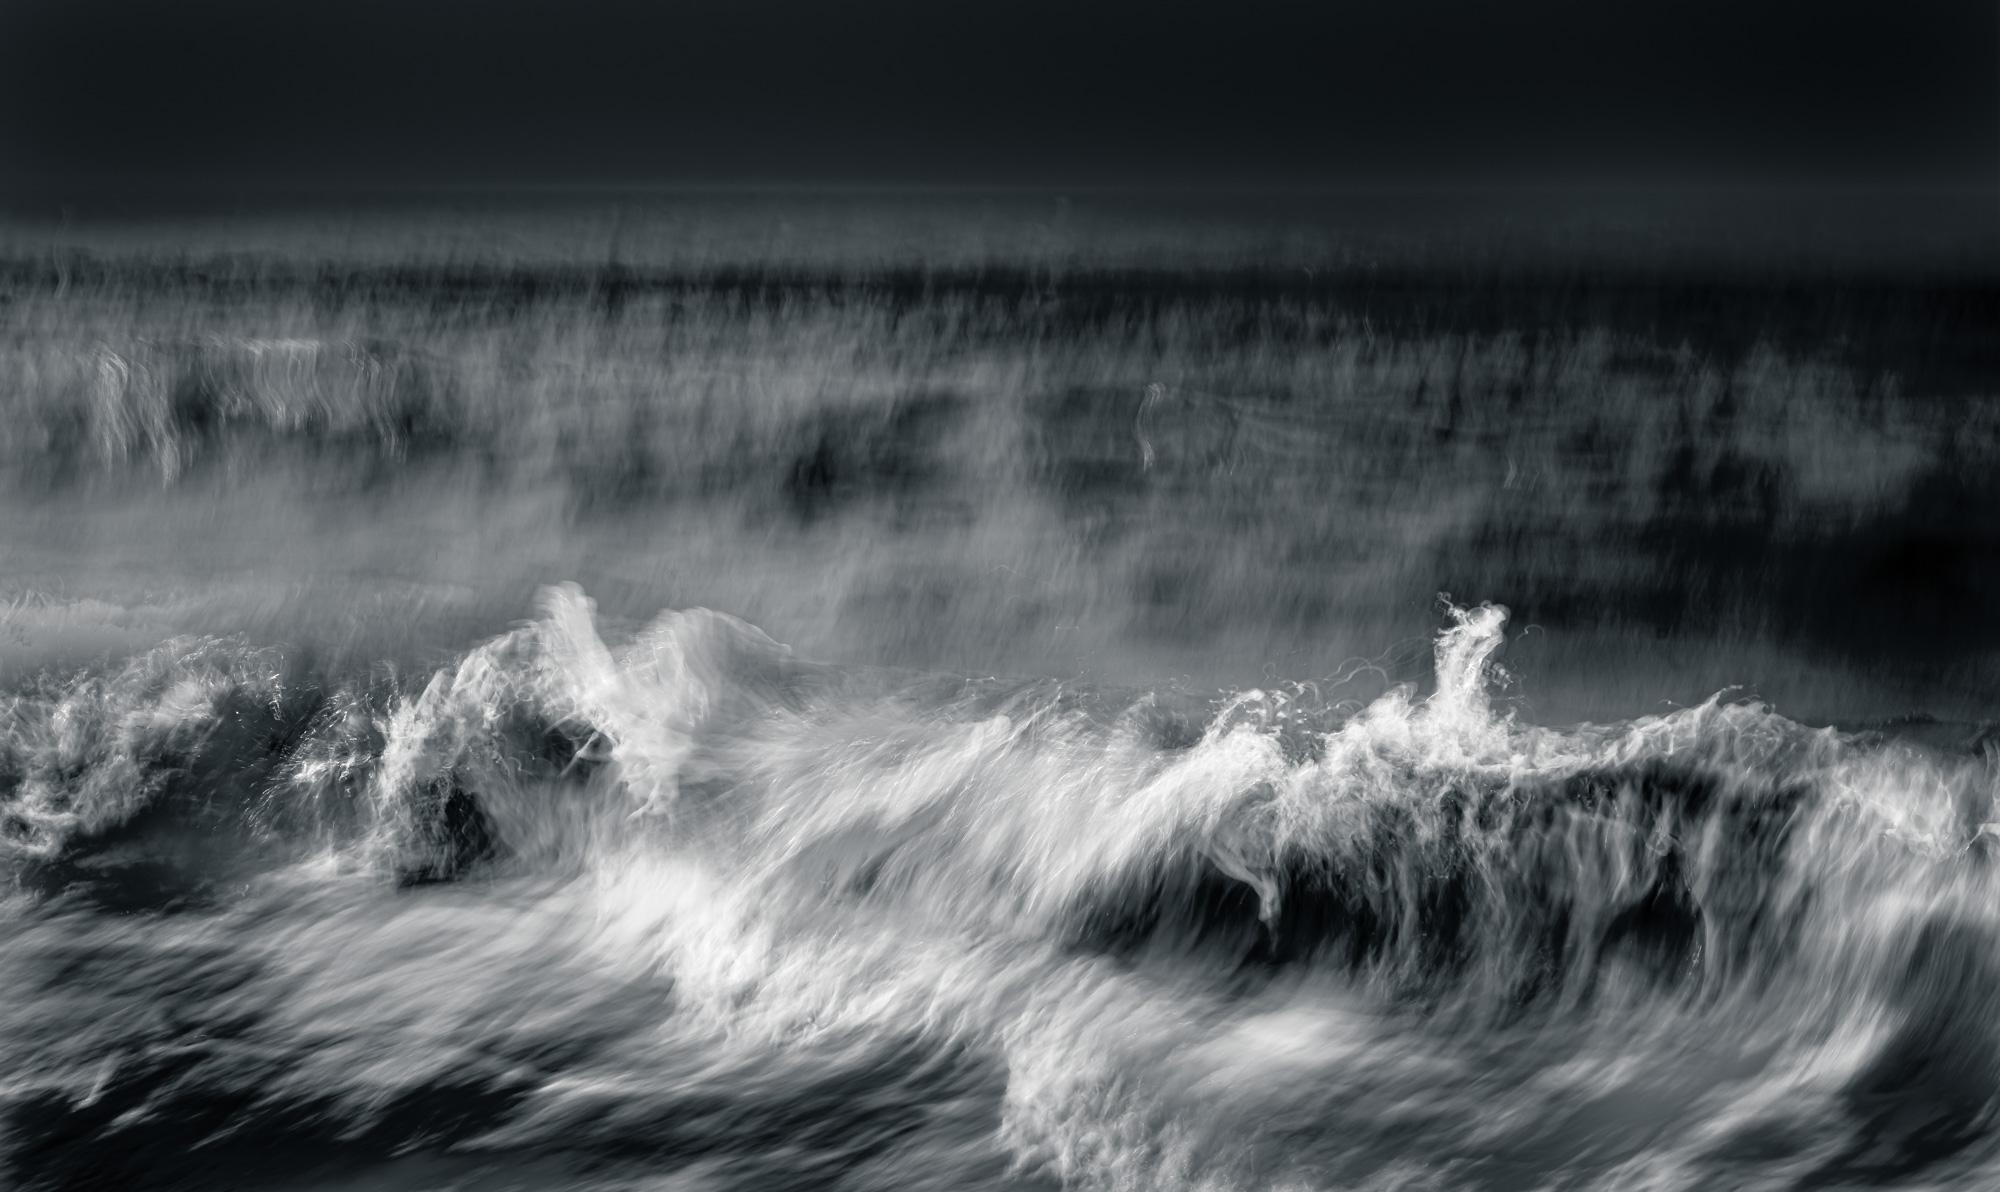 Limited Edition Black and White Lewis Photograph Water, Ocean. This is Untitled #39 from the Kinetic Solitude series. Kinetic Solitude has been exhibited in the Dow museum as part of their "Water" exhibition.

My photographic series “Kinetic